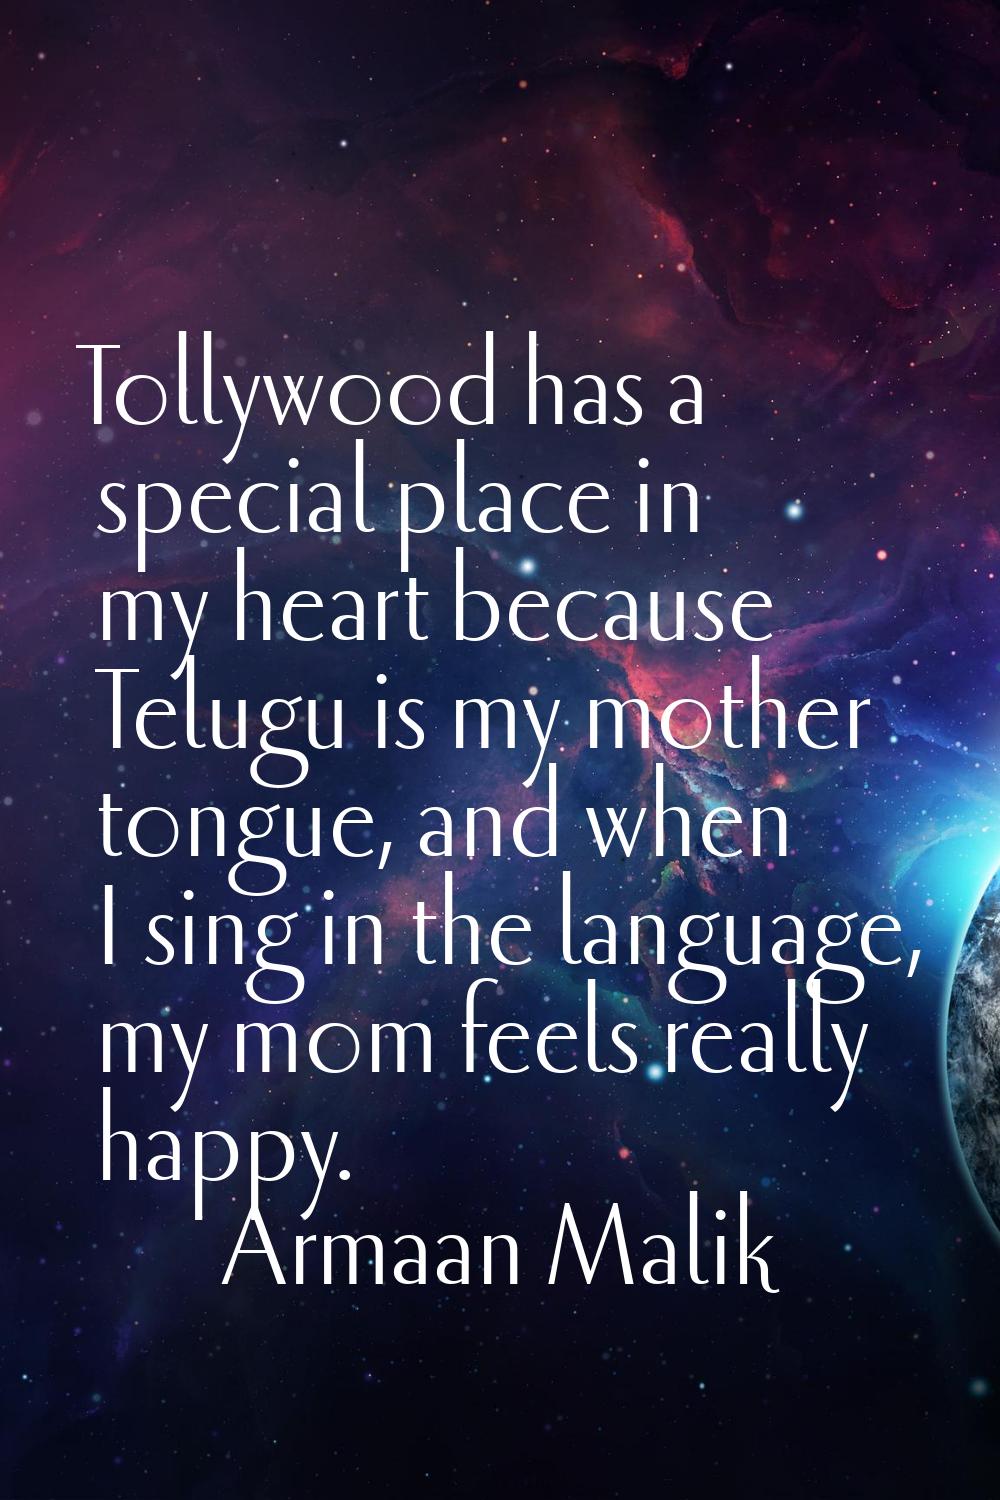 Tollywood has a special place in my heart because Telugu is my mother tongue, and when I sing in th